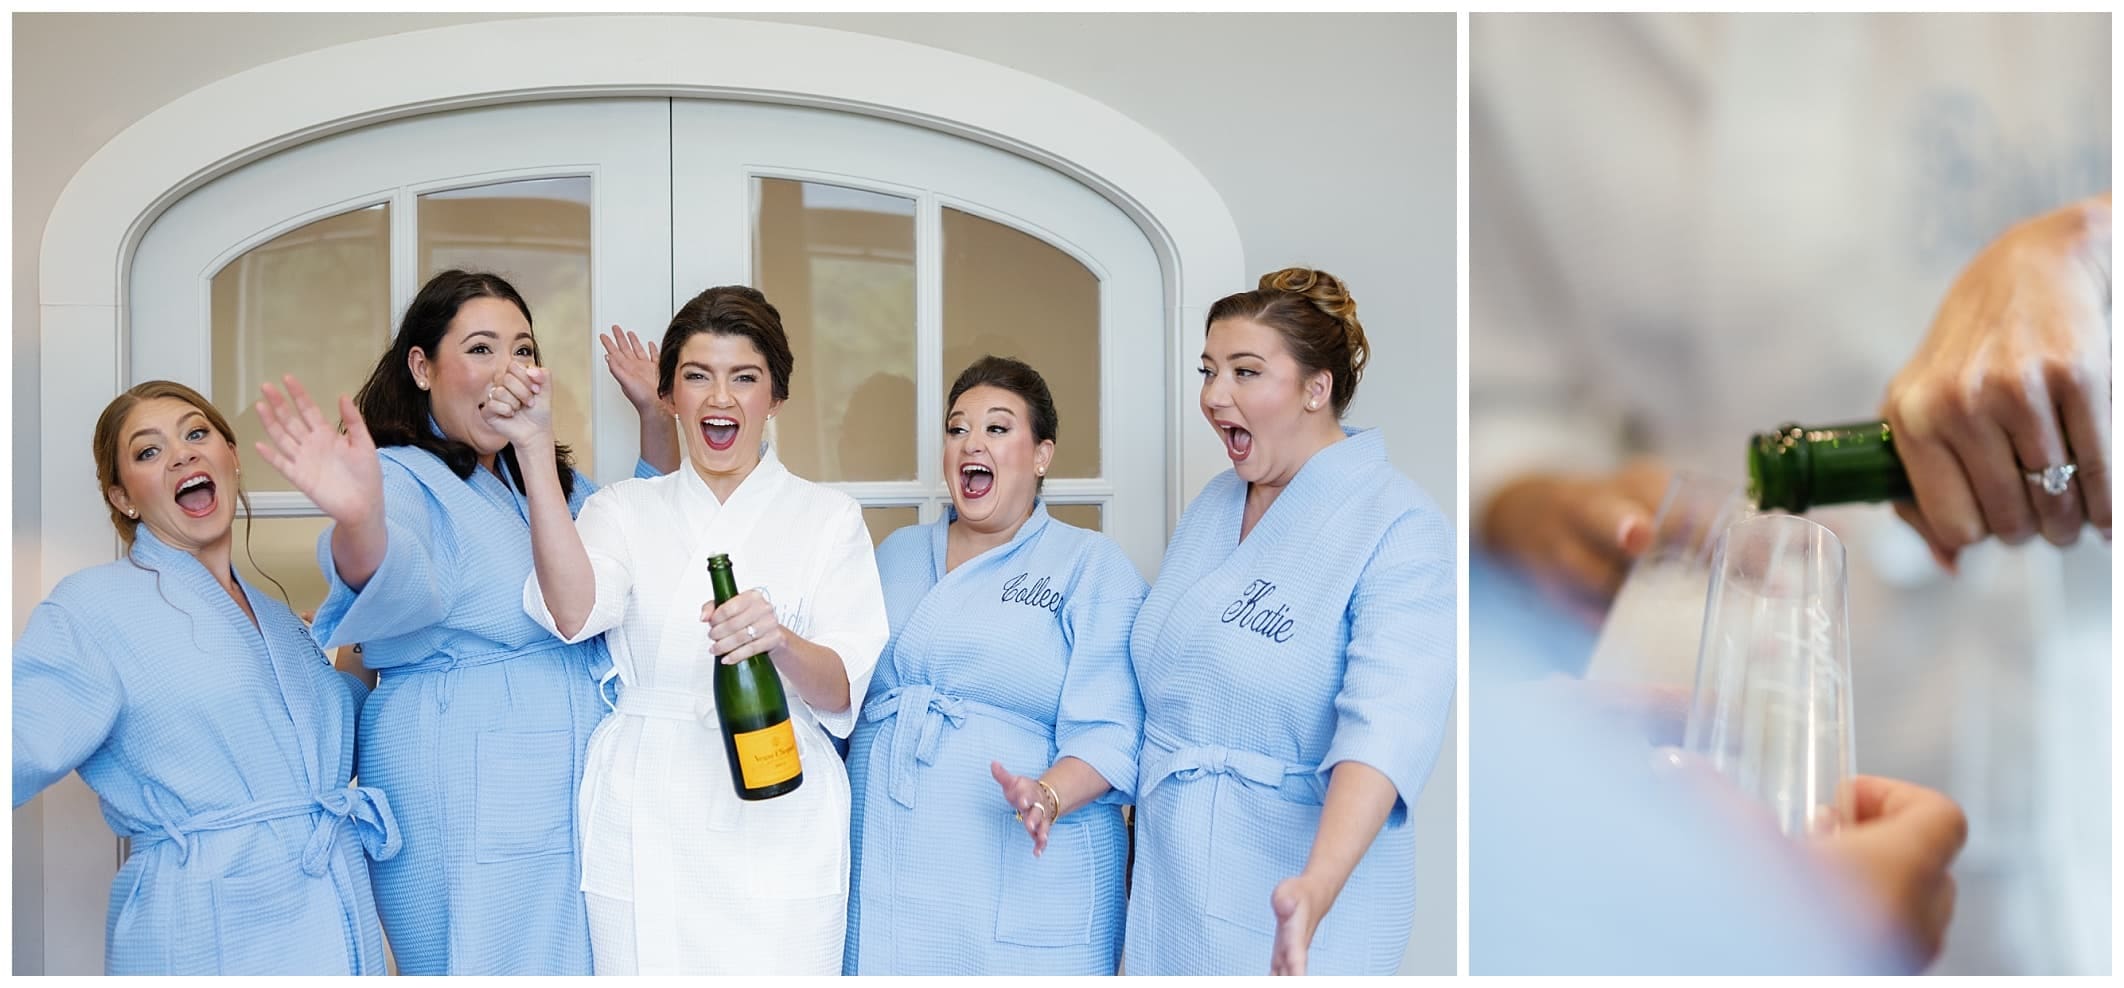 A group of bridesmaids in blue robes holding a bottle of champagne.